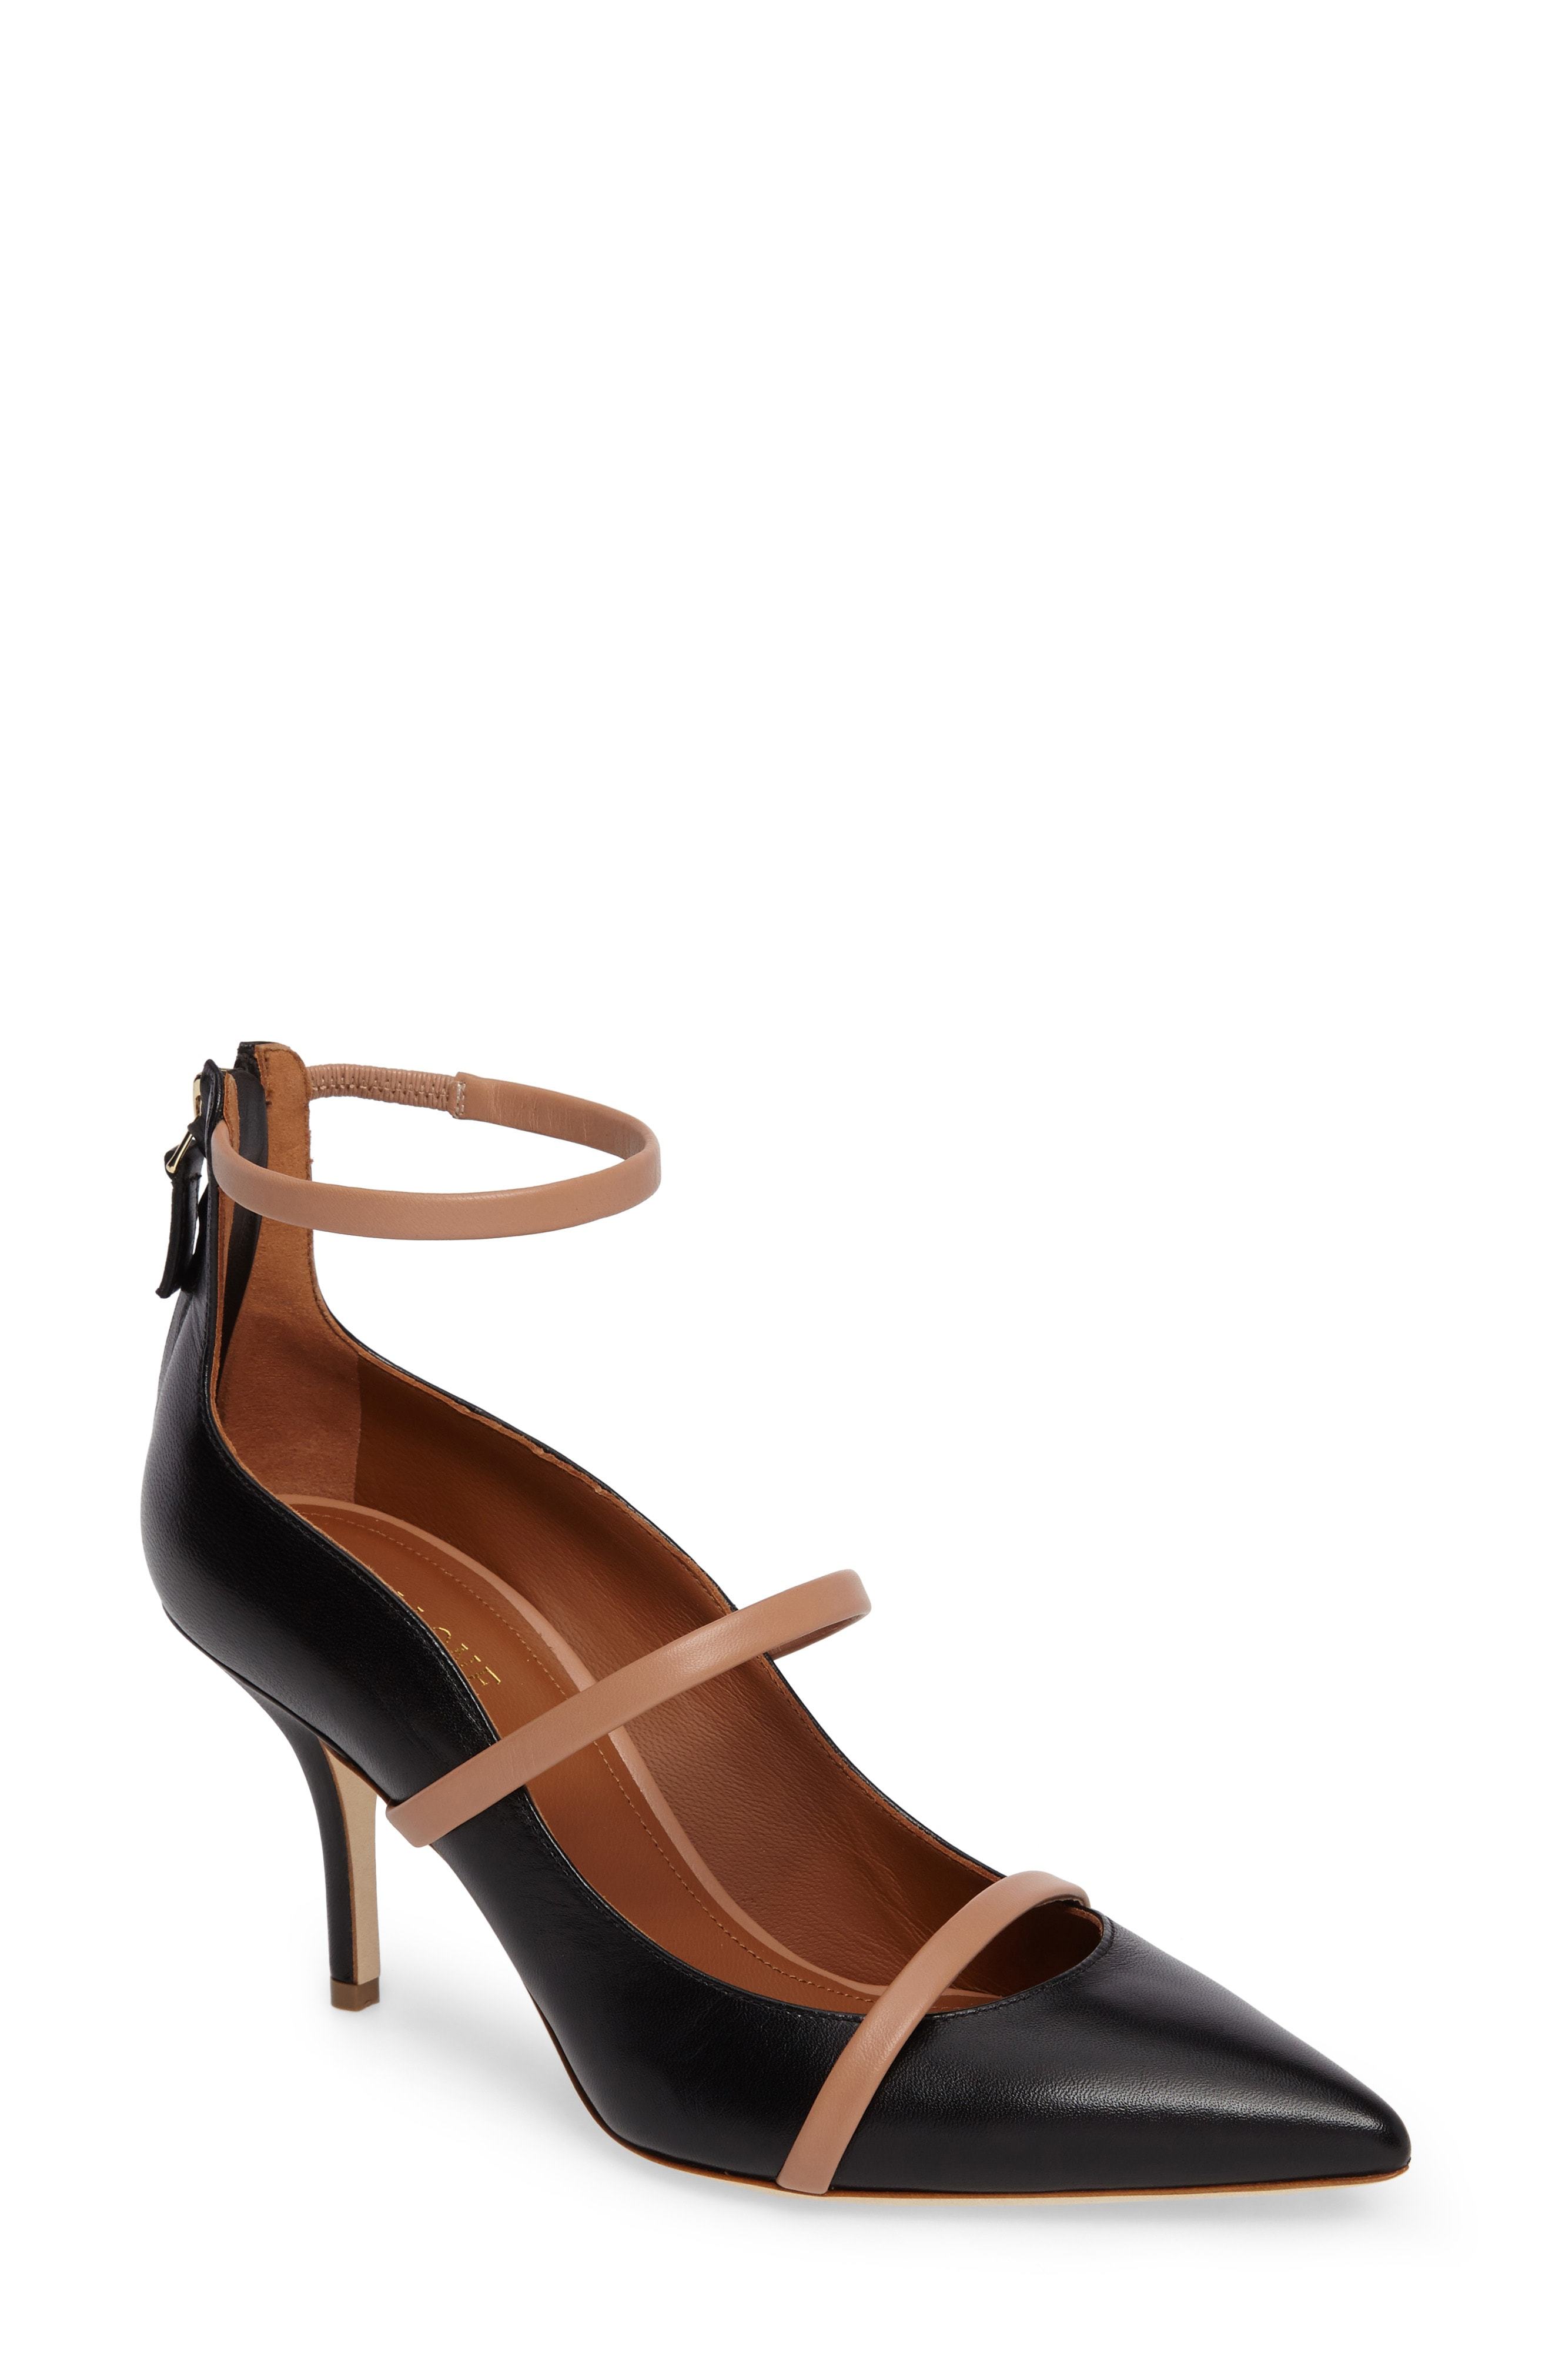 MALONE SOULIERS BY ROY LUWOLT Robyn Pump, $595 | Nordstrom | Lookastic